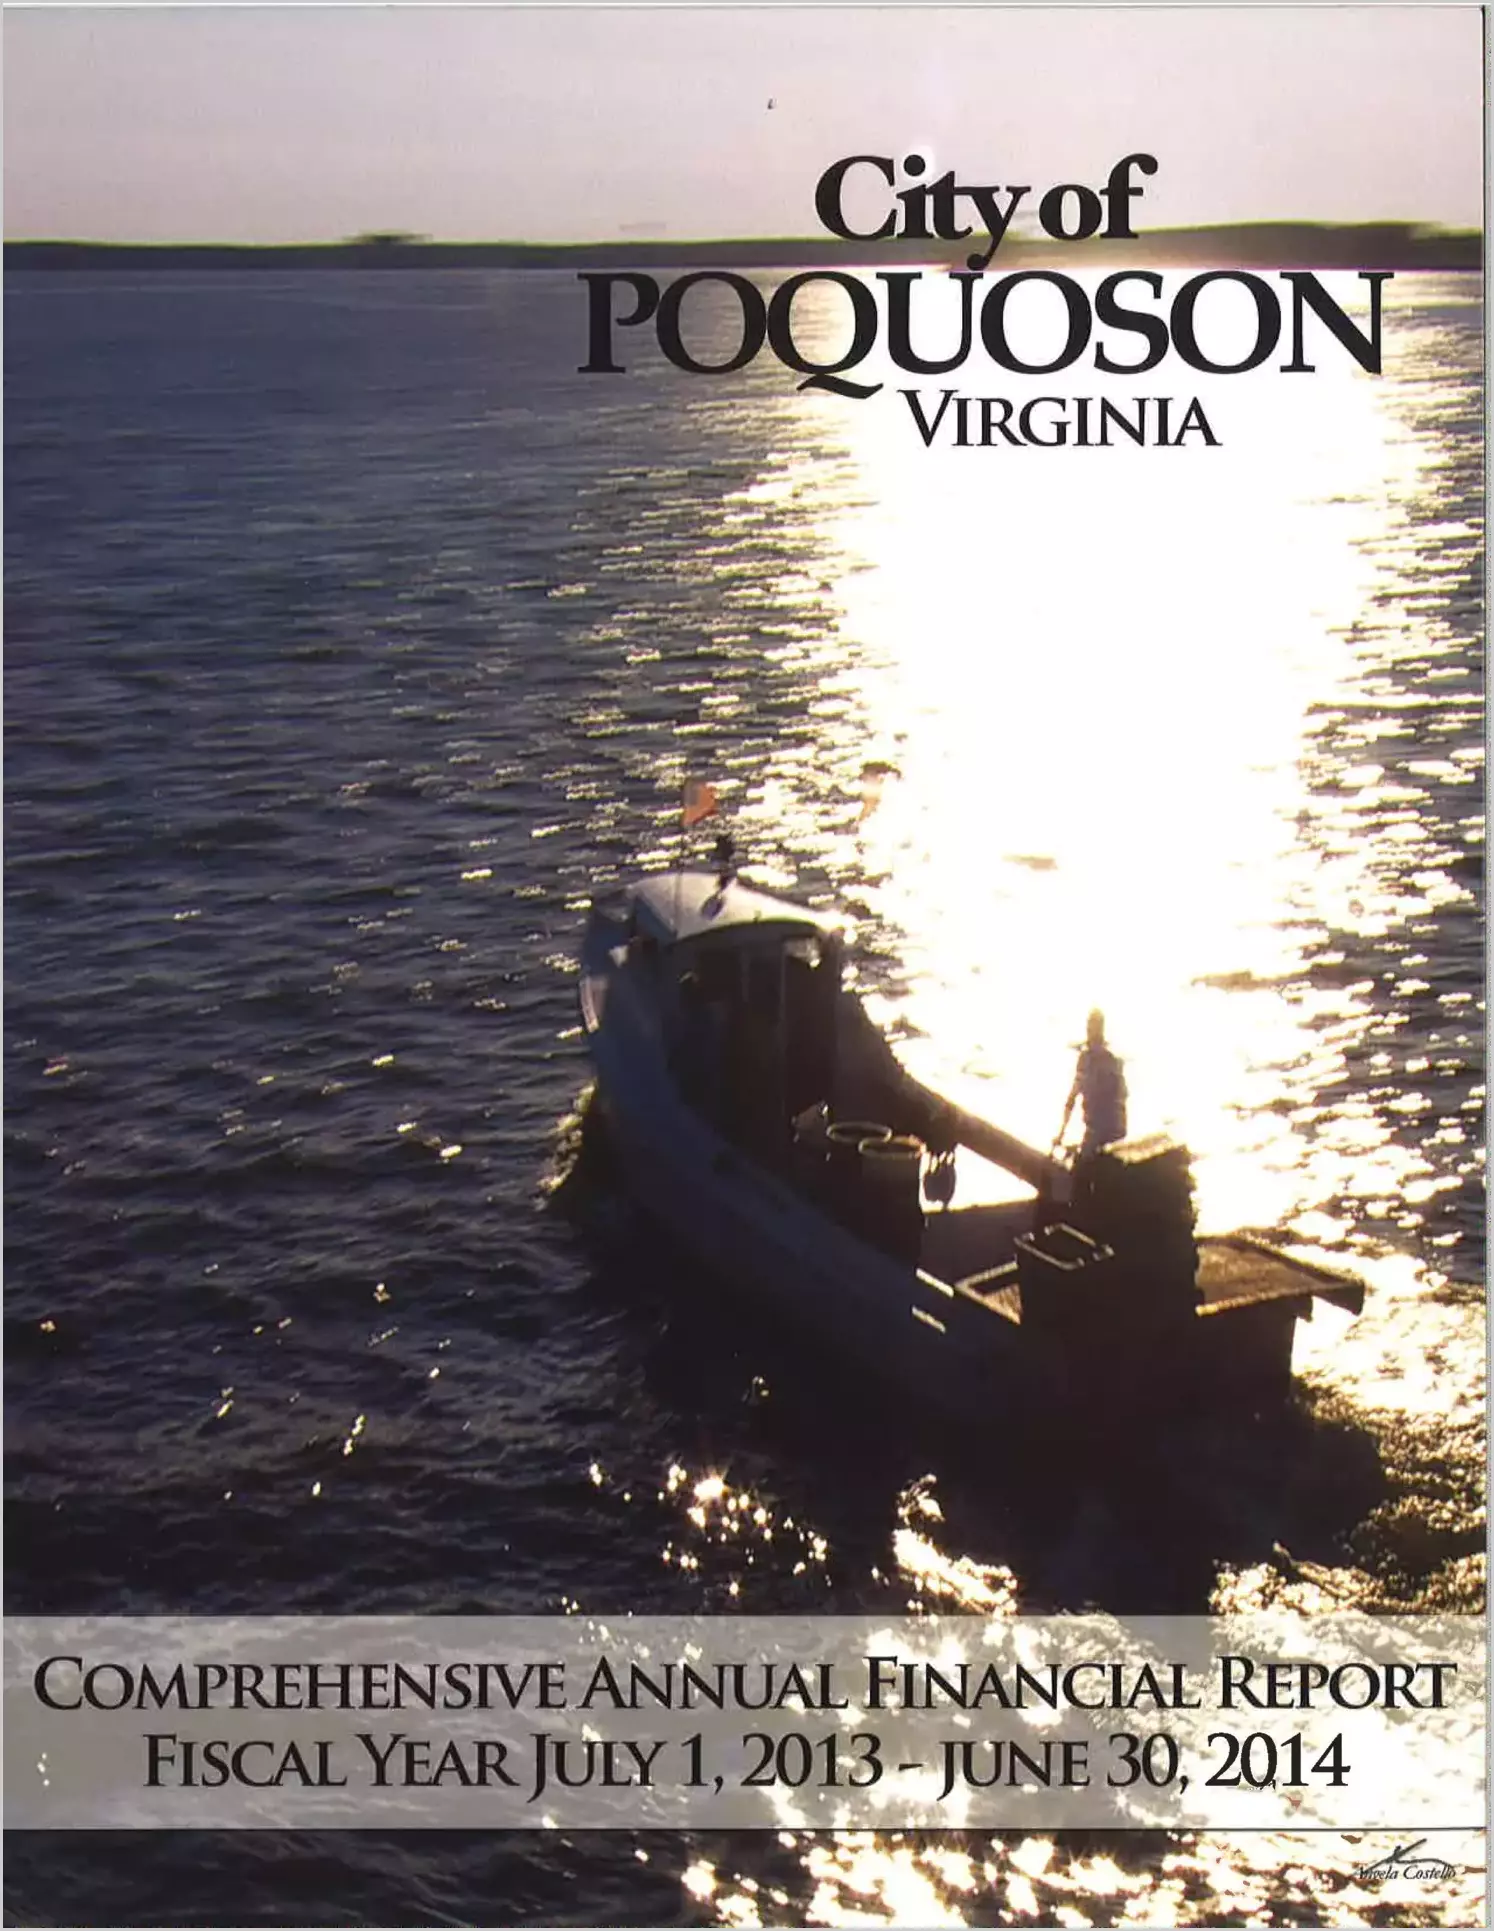 2014 Annual Financial Report for City of Poquoson